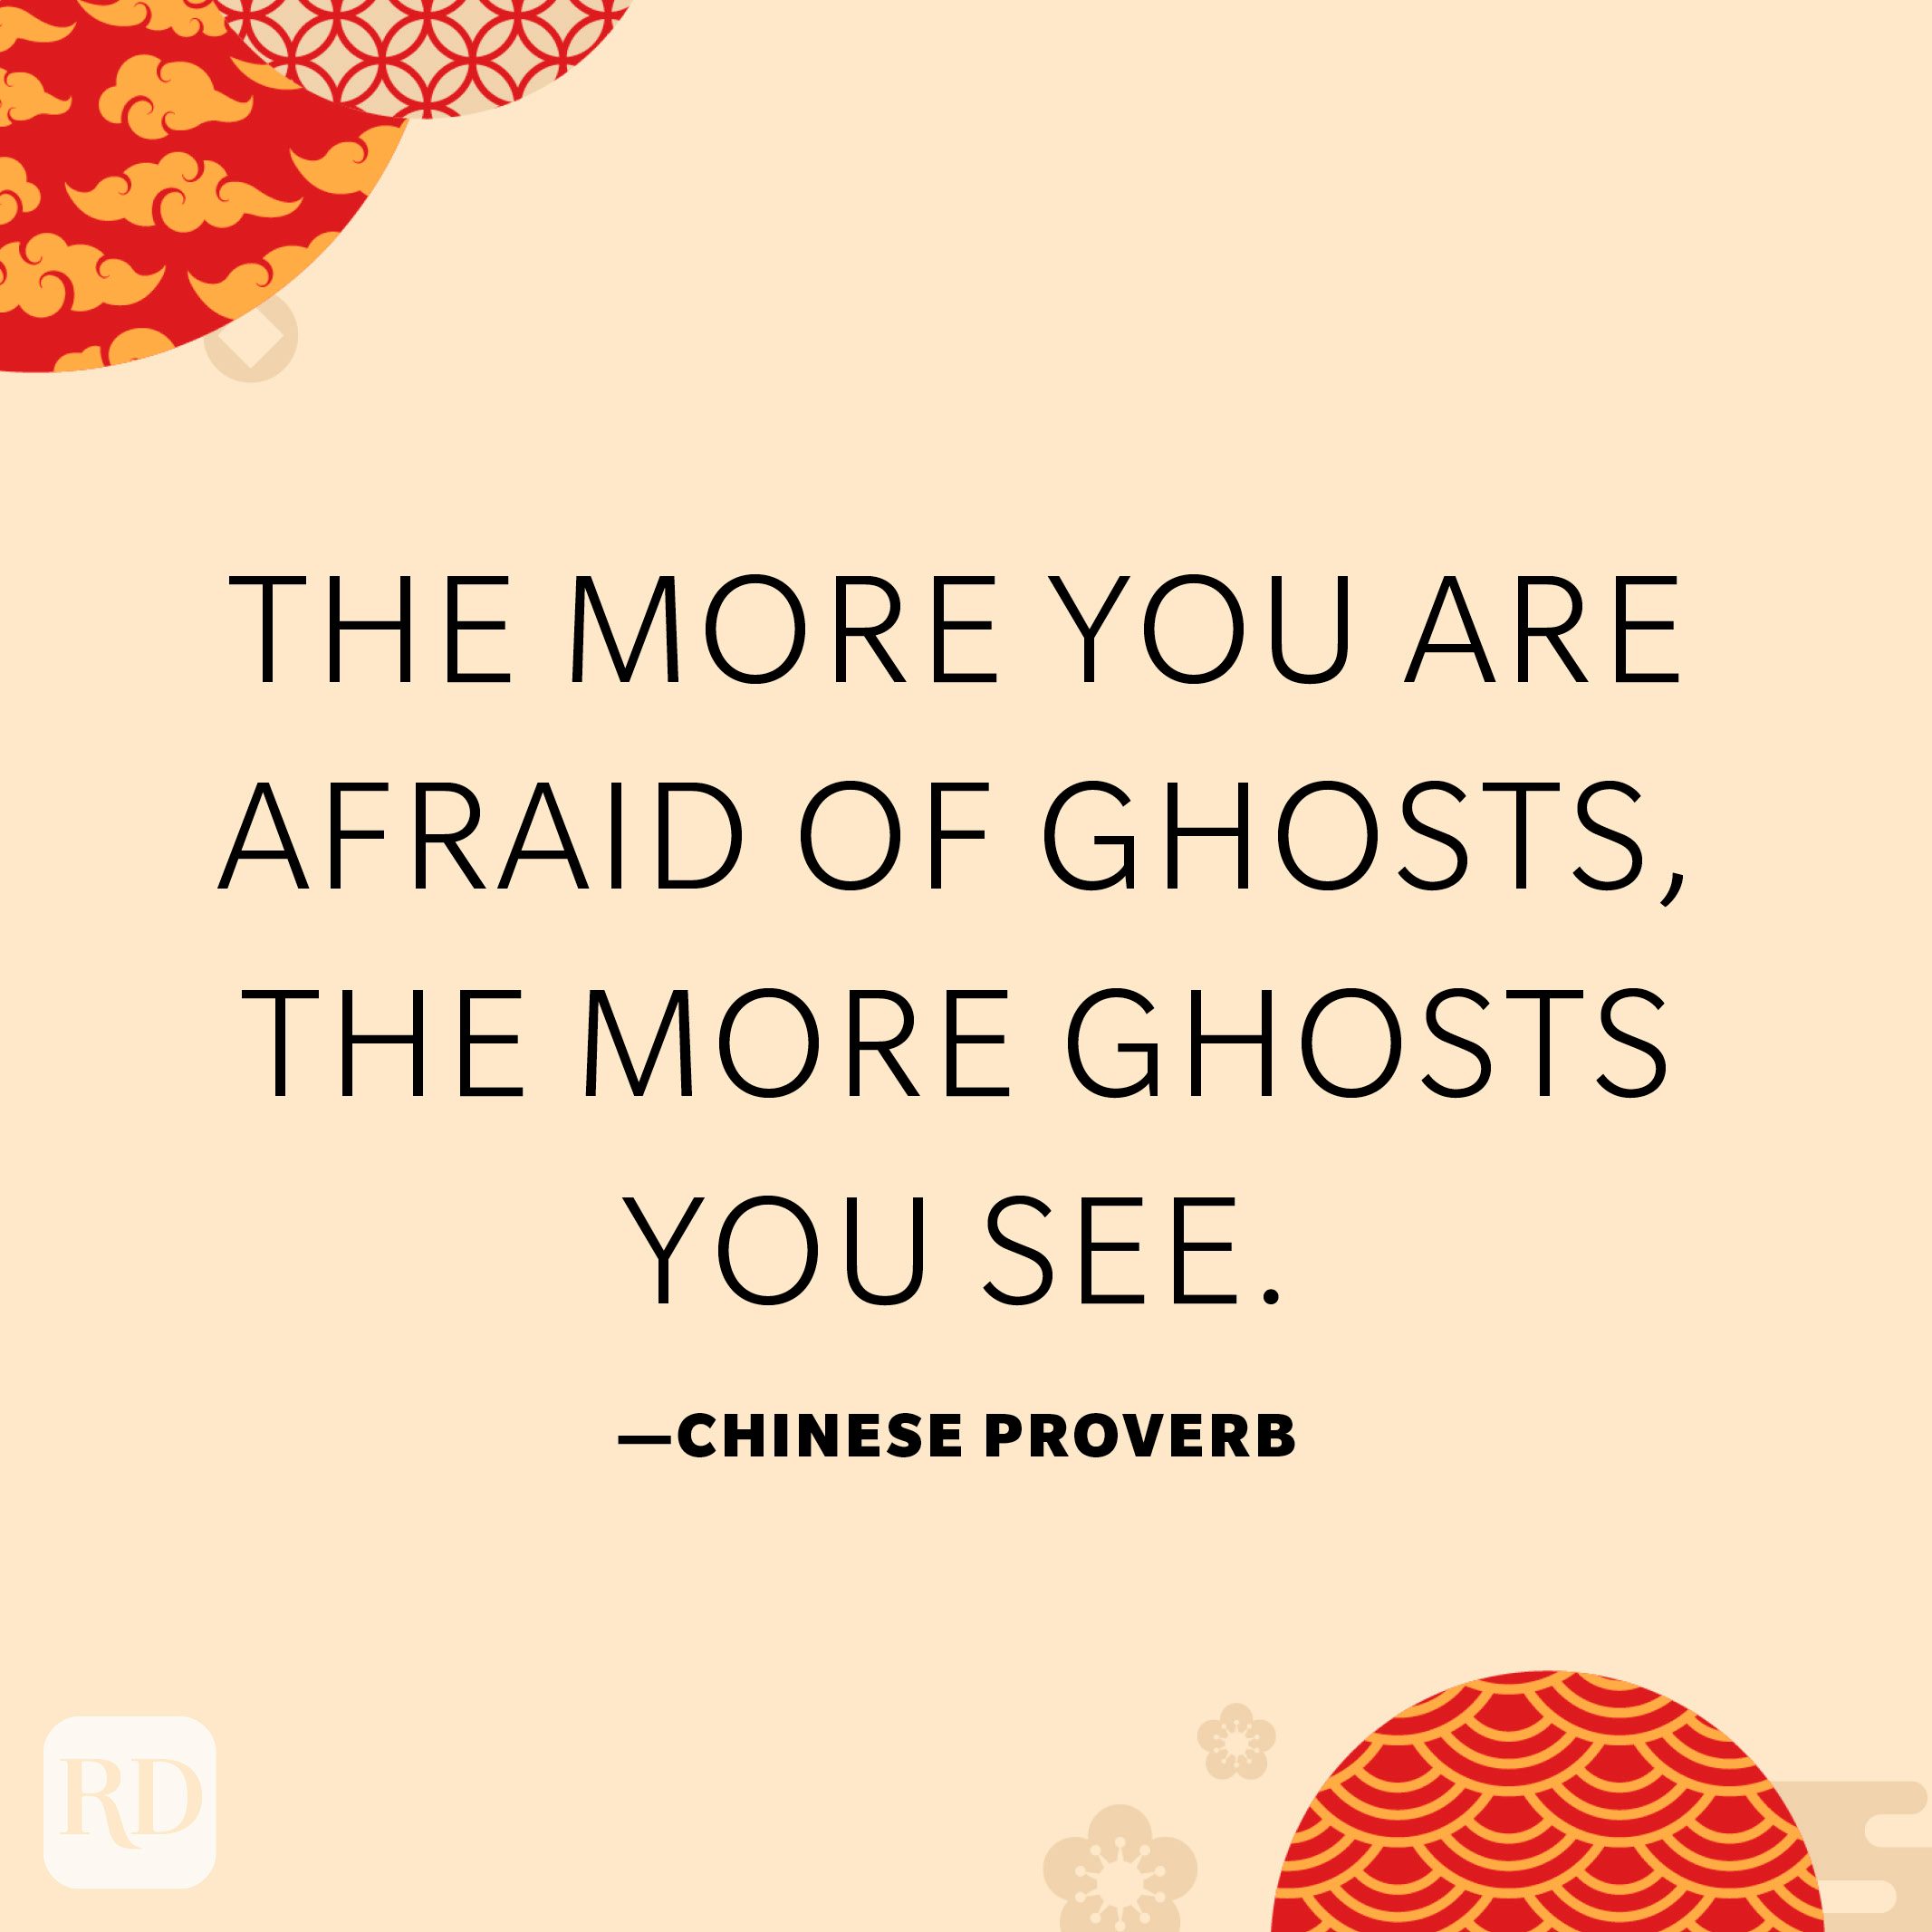 The more you are afraid of ghosts, the more ghosts you see.